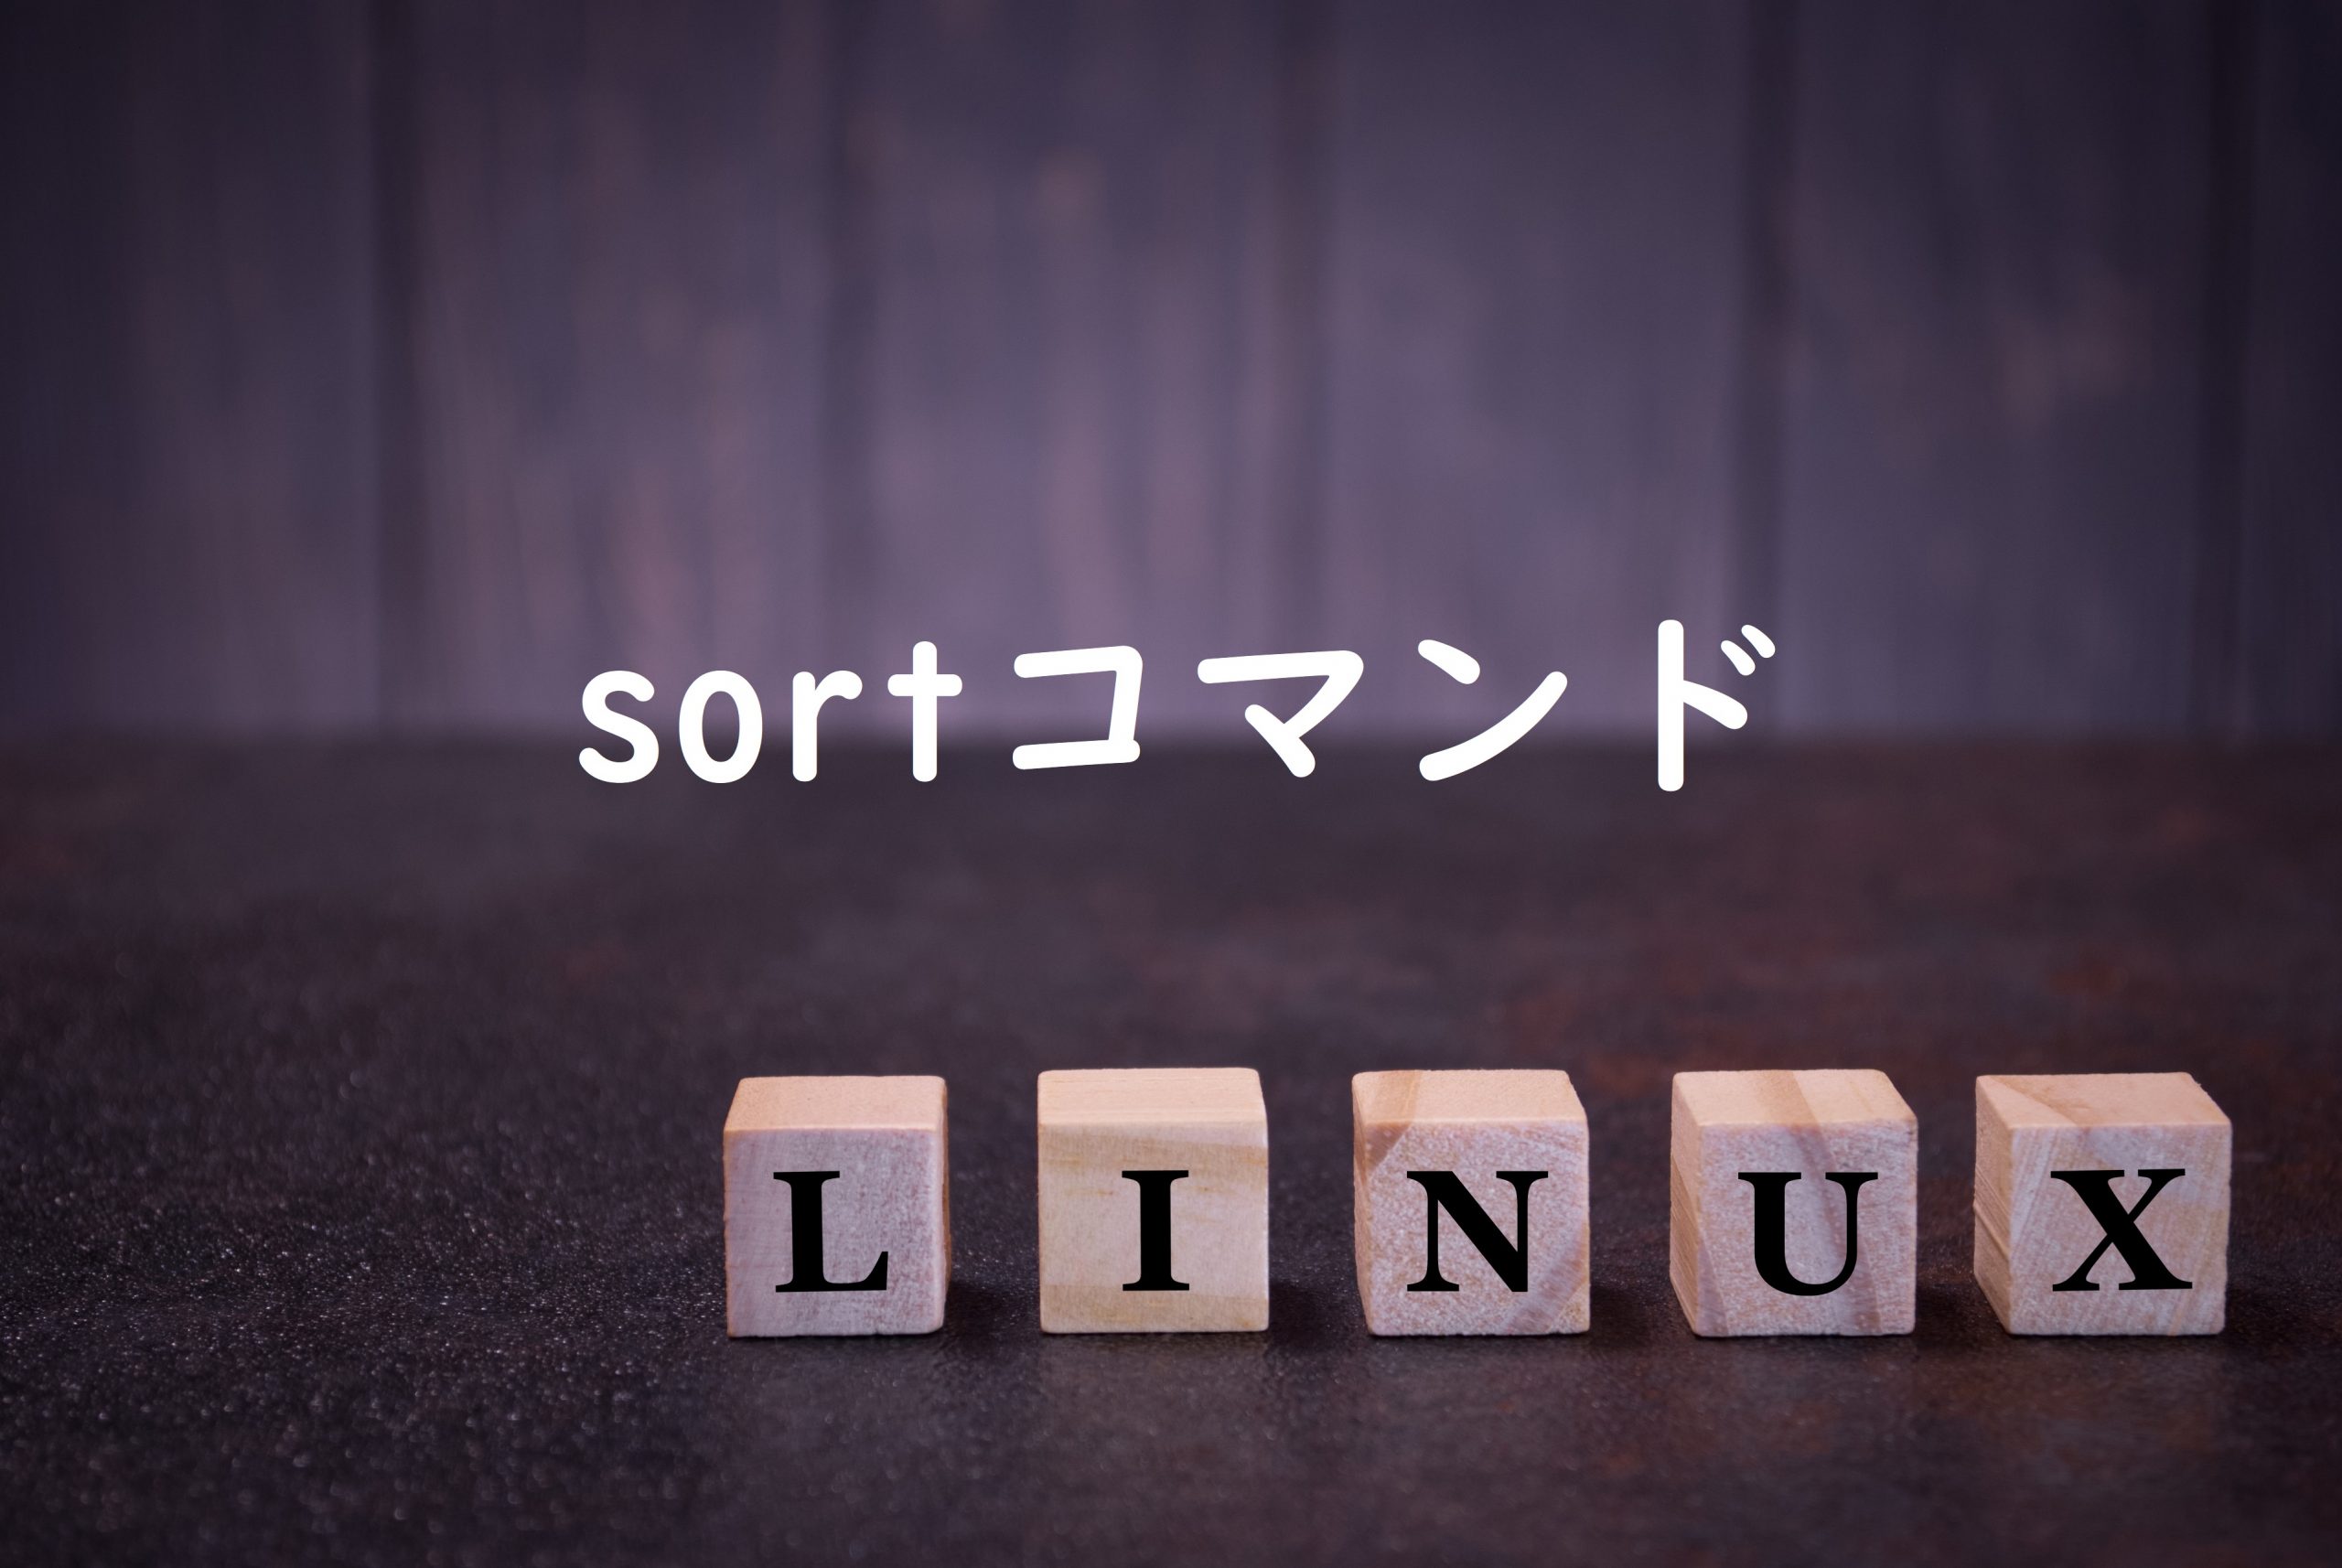 The word linux on wooden cubes, on a dark background, symbols signs